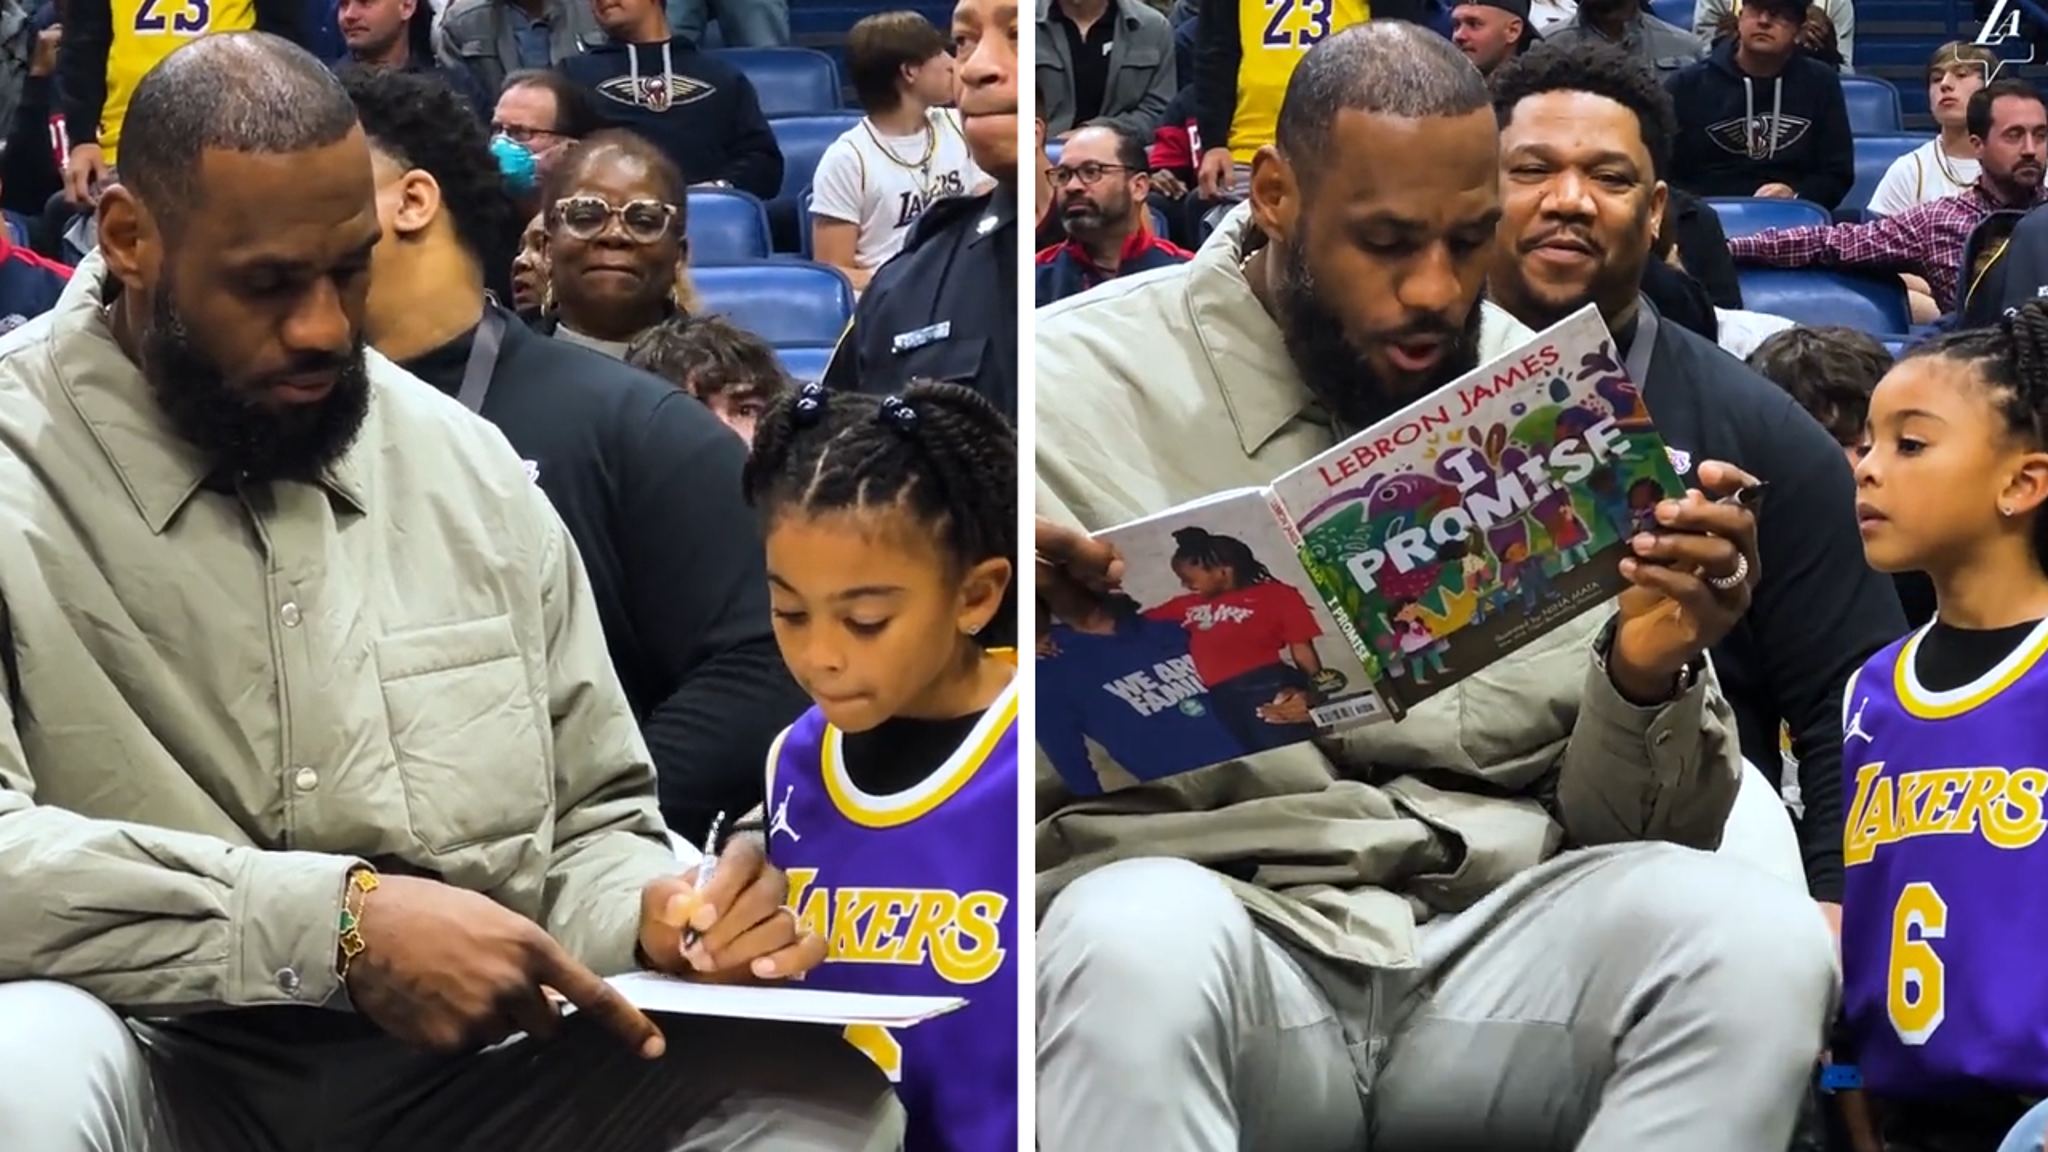 LeBron James Signs Young Fan's 'I Promise' Book During Lakers Game